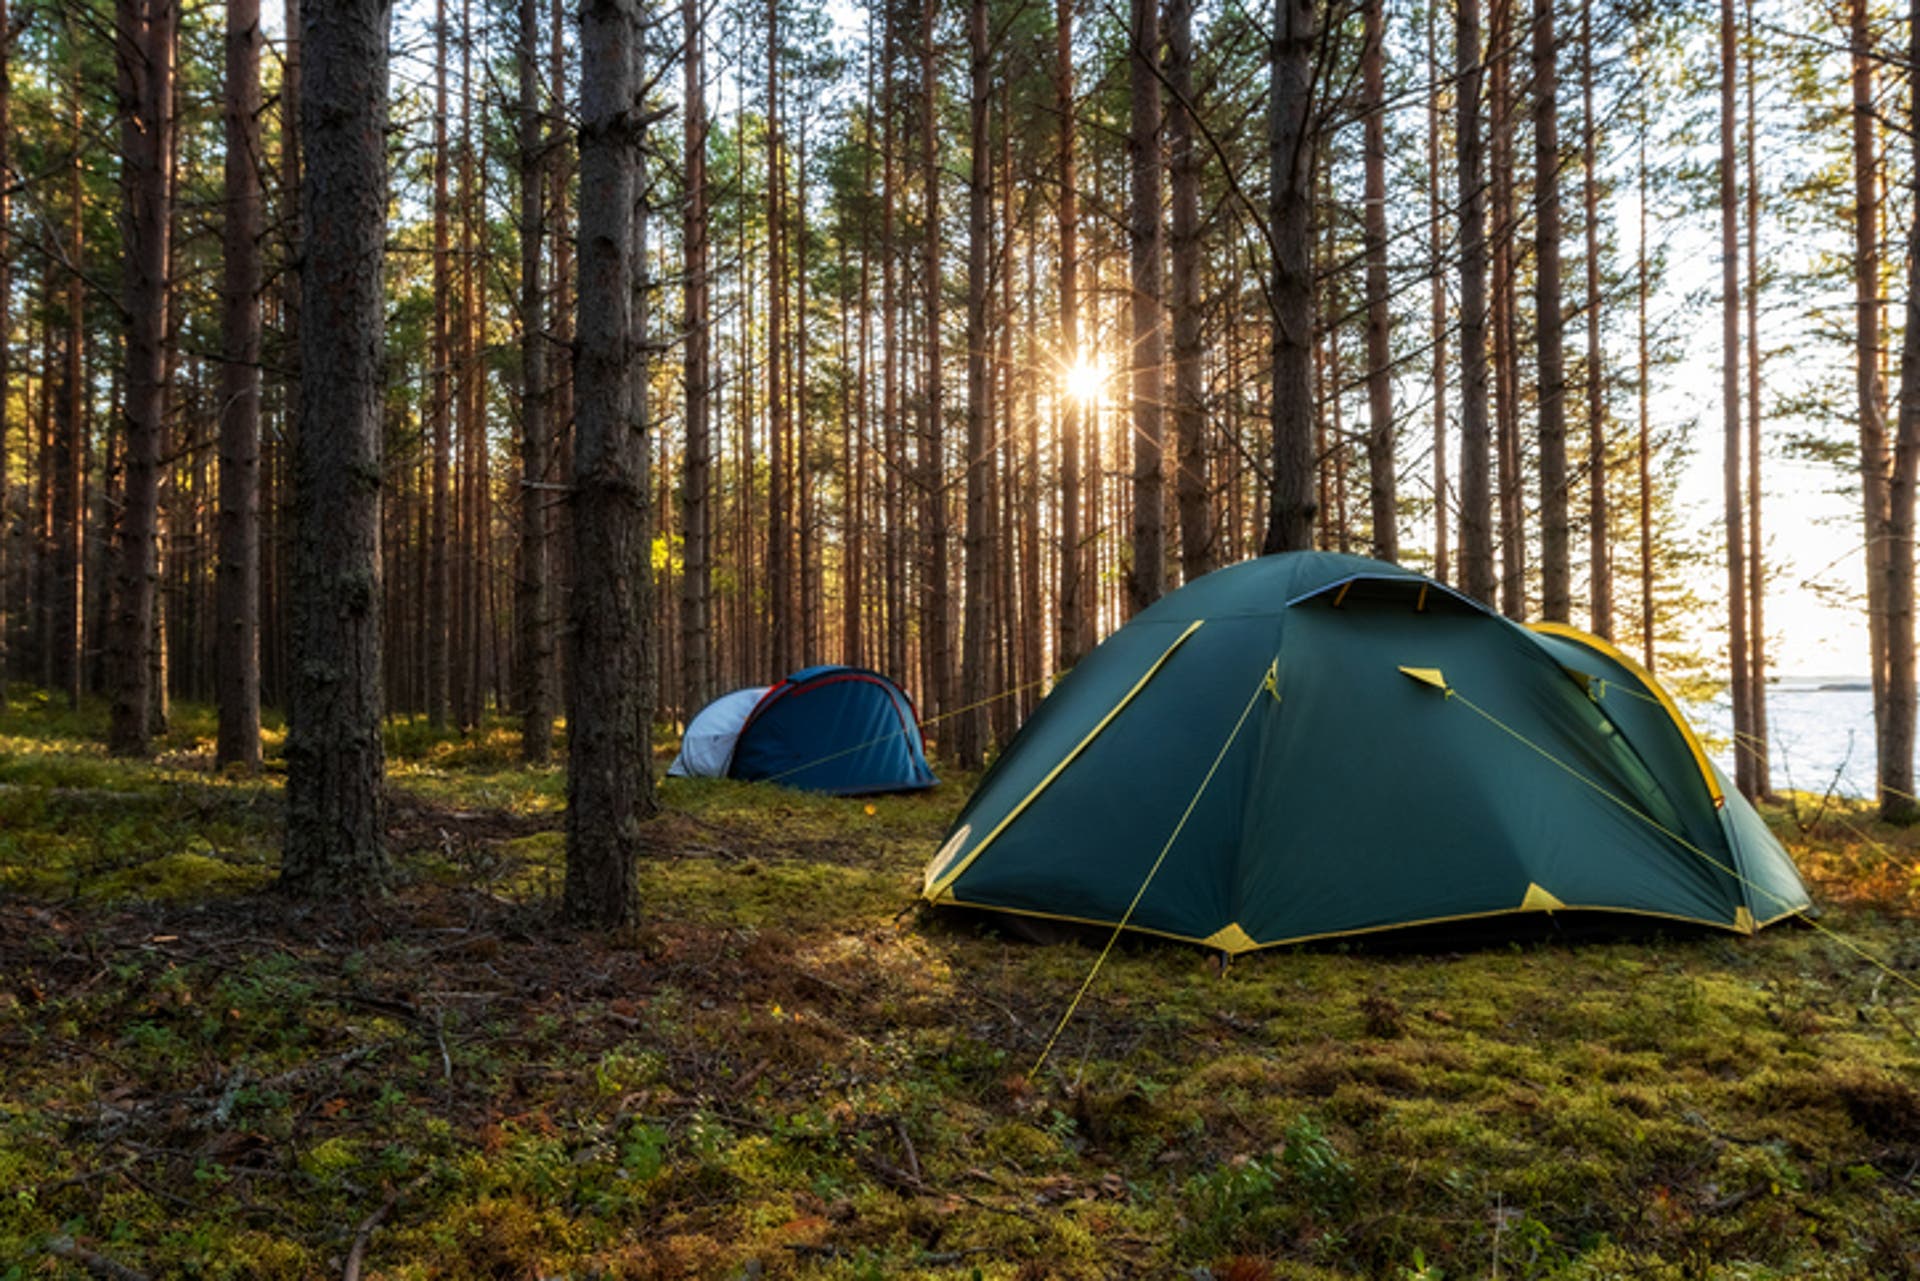  Camping tents in a sunny pine forest 